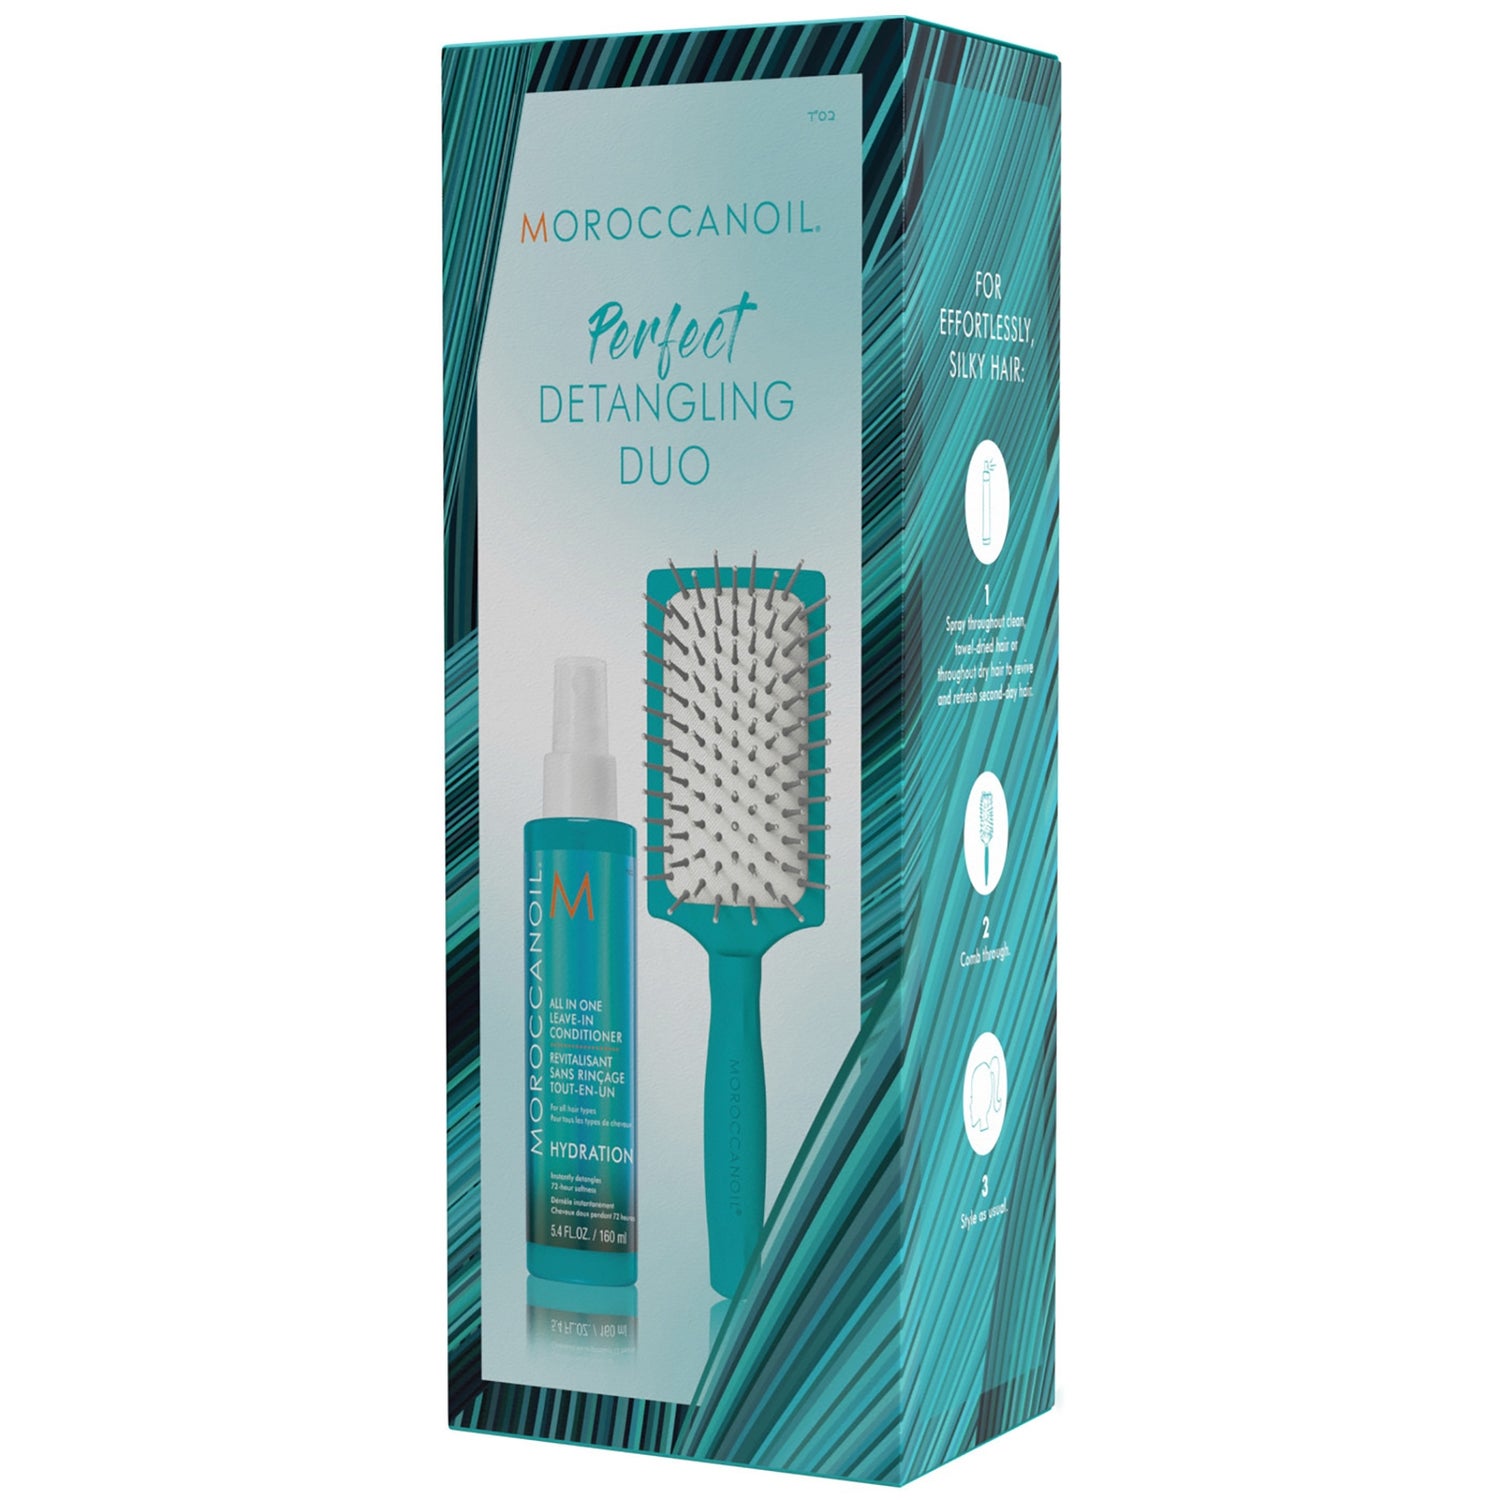 Moroccanoil All-in-One Leave-in Conditioner 160ml and Mini Paddle Brush (Worth £35.70)